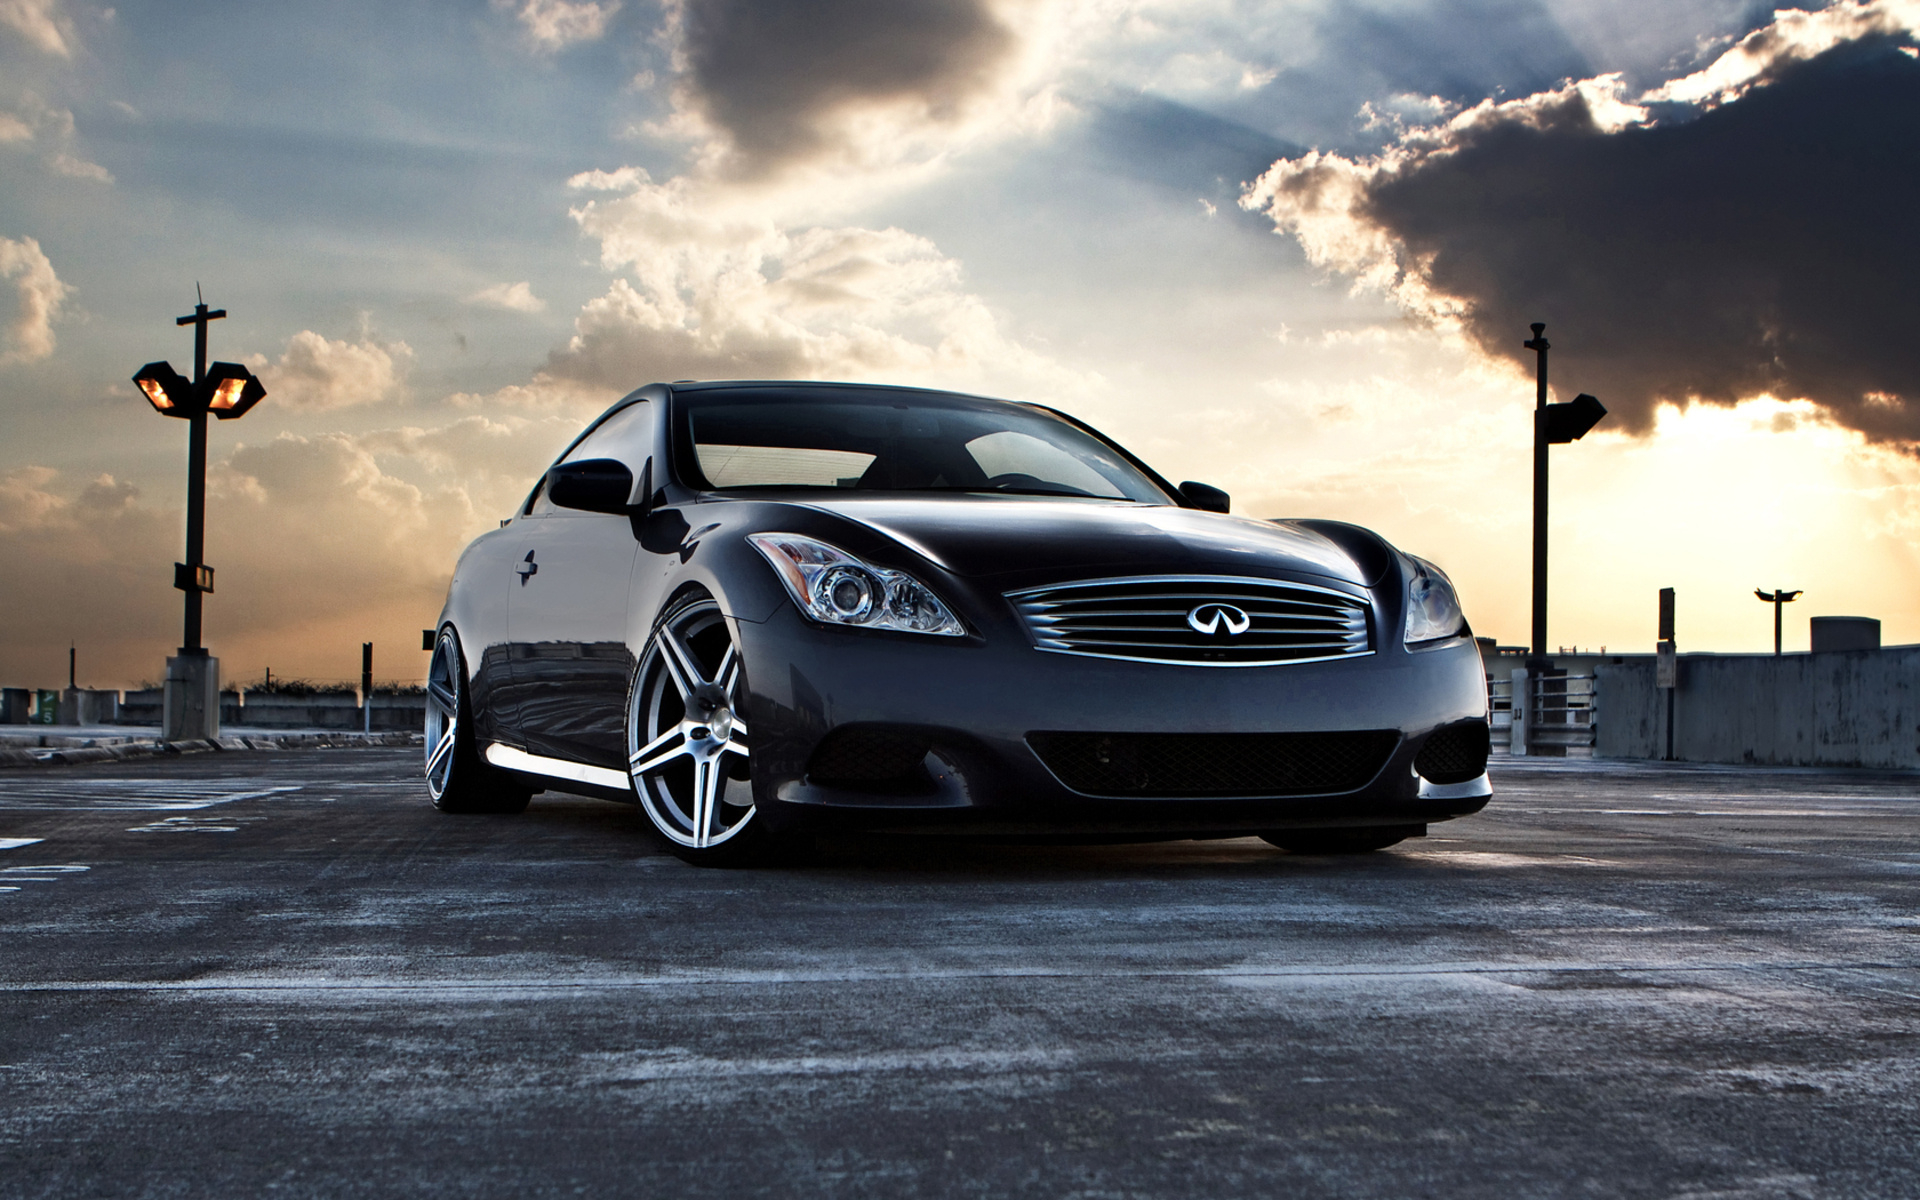 Infiniti G37 HD Wallpapers and Backgrounds 1920x1200